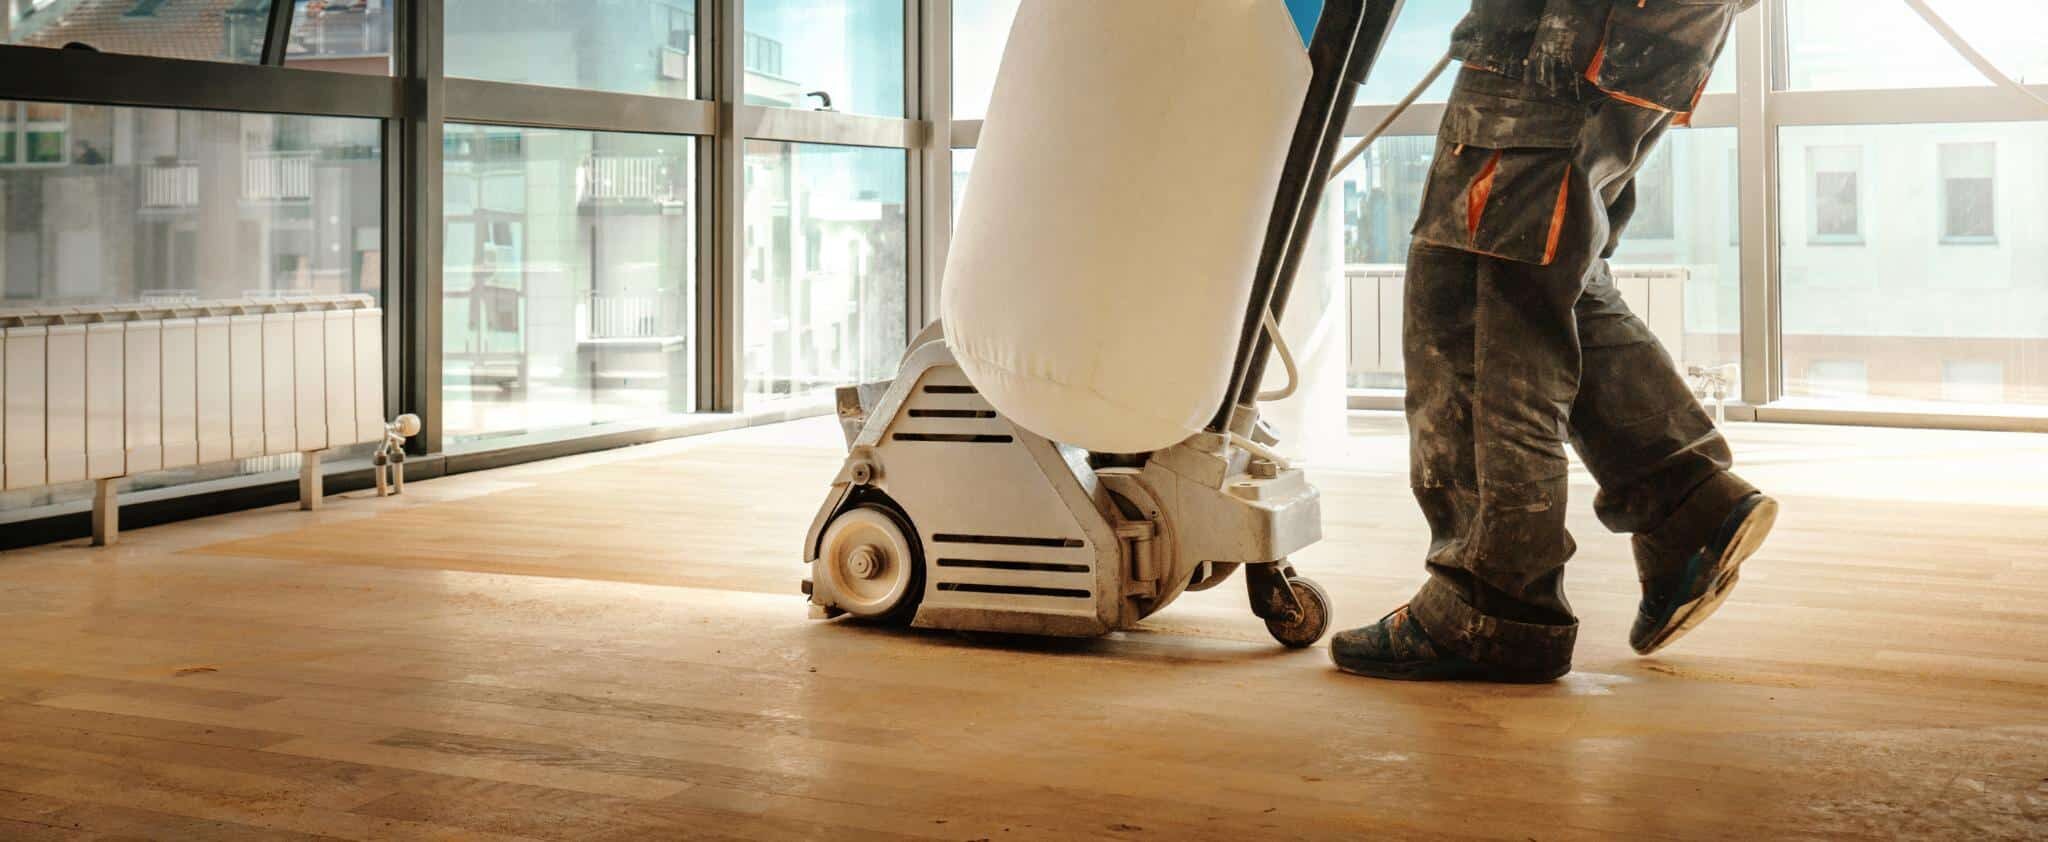 In North Kensington, W10, Mr Sander® utilize a Bona Scorpion drum sander, boasting dimensions of 200 mm and an effect of 1.5 kW. Powered by 240 V voltage and 50 Hz frequency, it is connected to a dust extraction system with a HEPA filter for cleanliness and efficiency. 